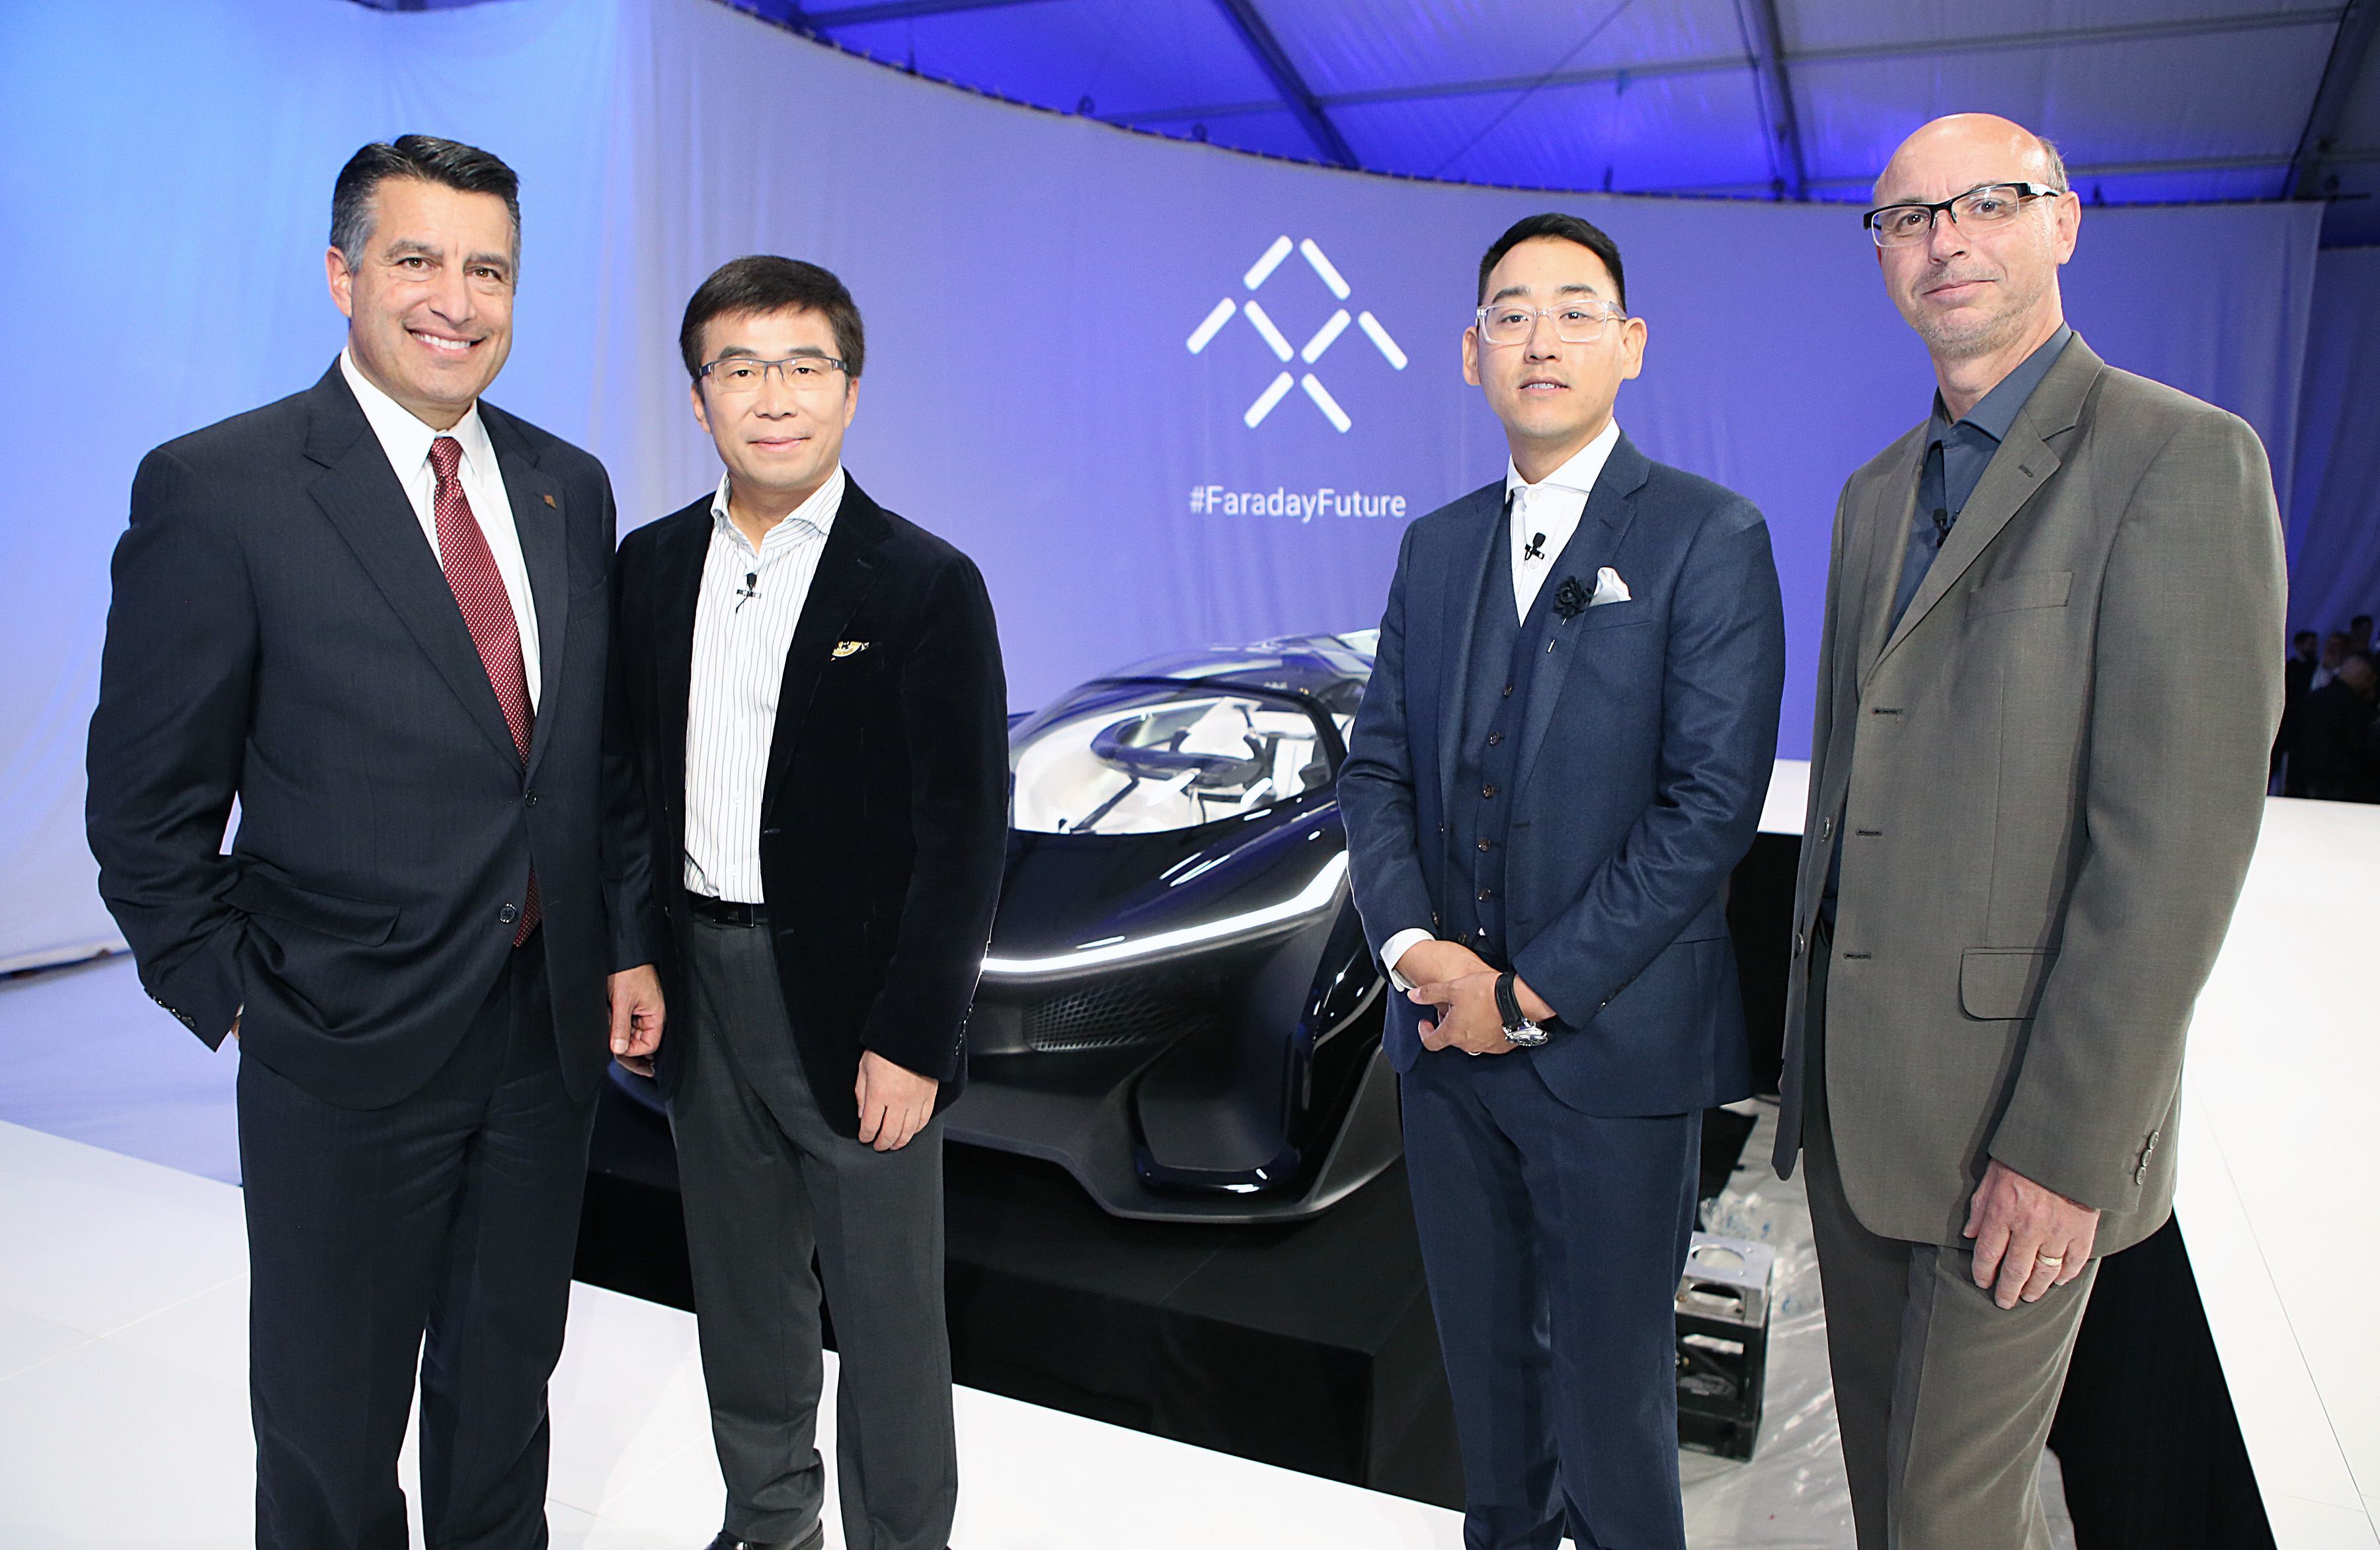 Governor Sandoval, left, Ding Lei, Co-Founder, Global Vice Chairman, Managing Director, SEE Plan, Letv, second left, Richard Kim, Faraday Future Global Design Director, second tight, and Nick Sampson, VP of R&D and Engineering pose for a photo during Faraday Future's pre-CES reveal of FFZERO1 Concept in Las Vegas on Monday, Jan. 4, 2016. (Bizuayehu Tesfaye/ AP Images for Faraday Future)